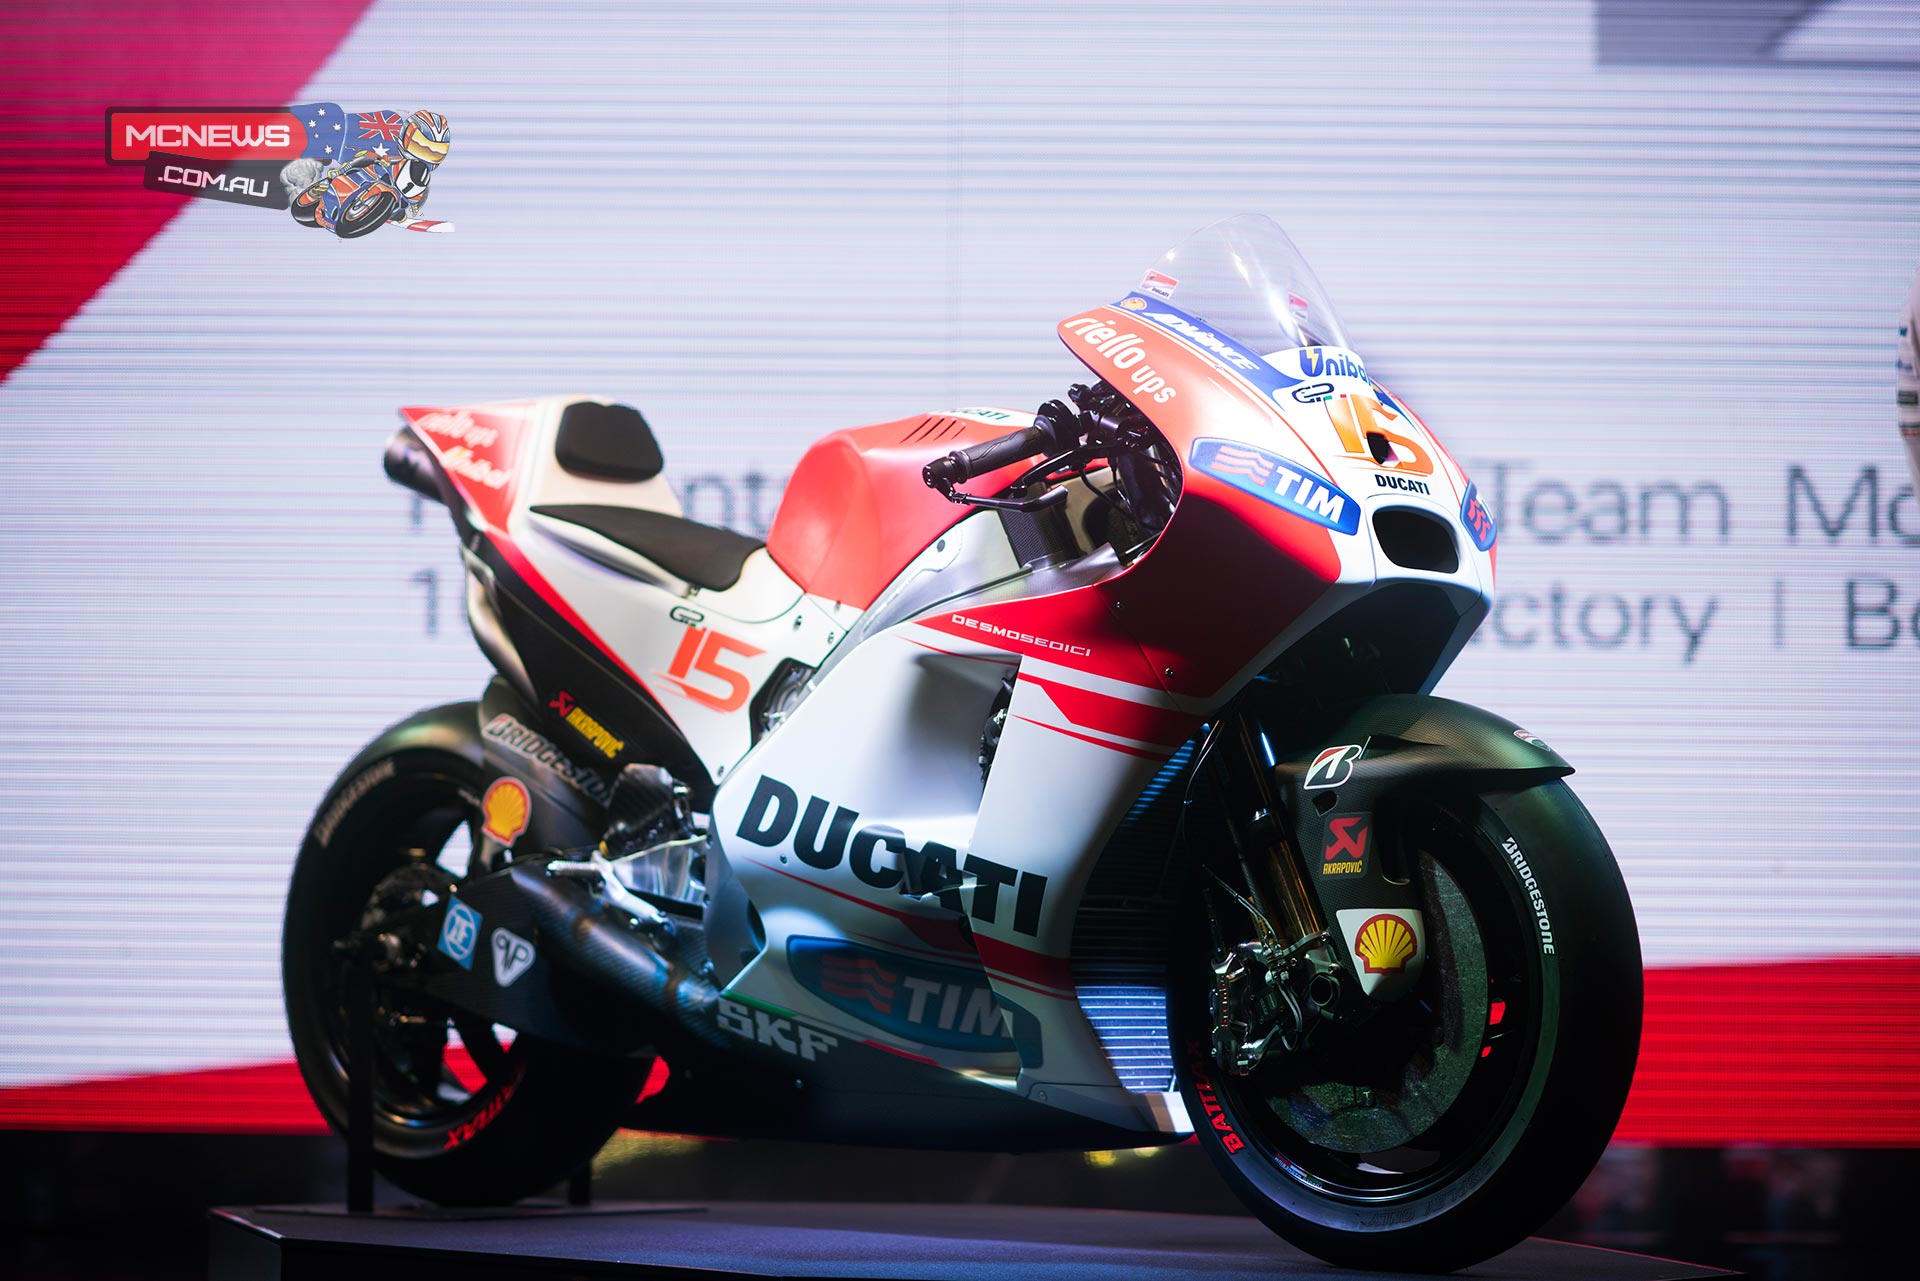 Ducati Desmosedici Gp15 Unveiled Motorcycle News Sport And Reviews